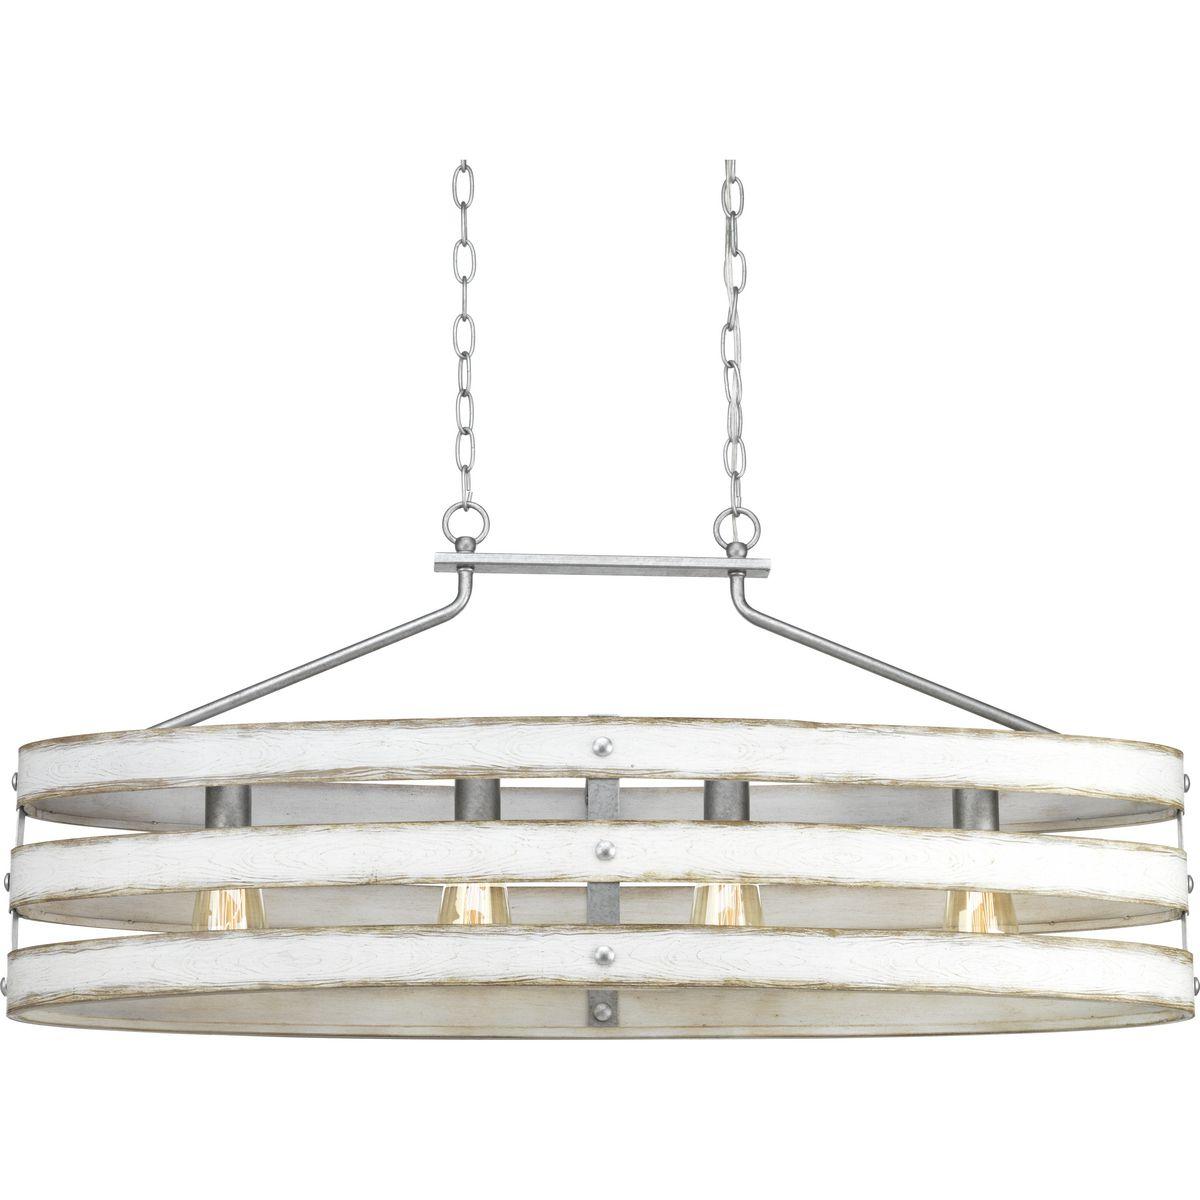 Hubbell P400097-141 Three circular bands wrap together to create an open design for the Gulliver Collection four-light linear chandelier. Dual toned frame color combinations of Galvanized with antique white accents. A hand painted wood grained texture complements Rustic and 